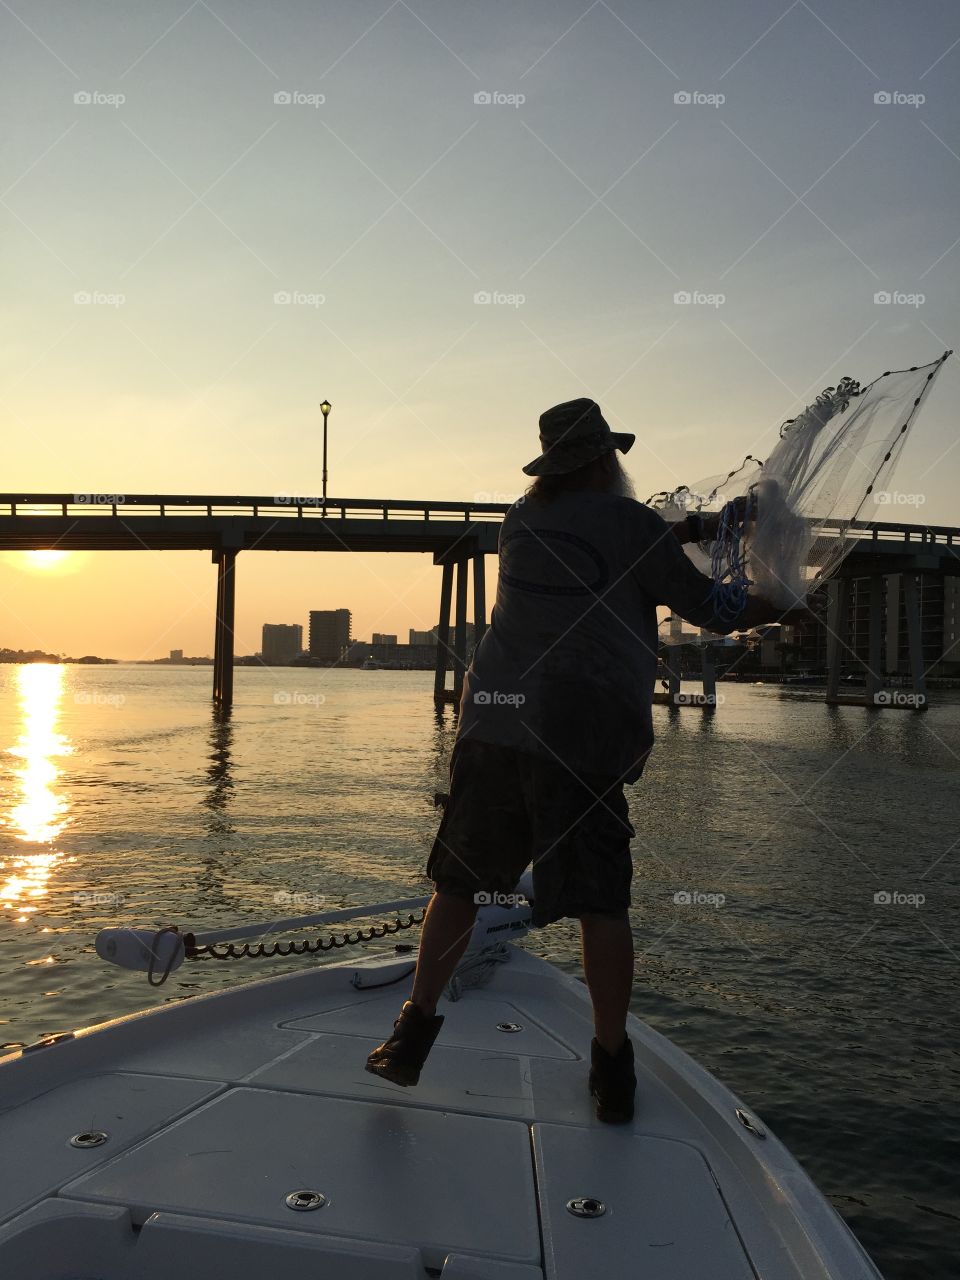 A Fisherman and his Passion. Our charter guide casts a net at sunrise in Orange Beach Alabama.
